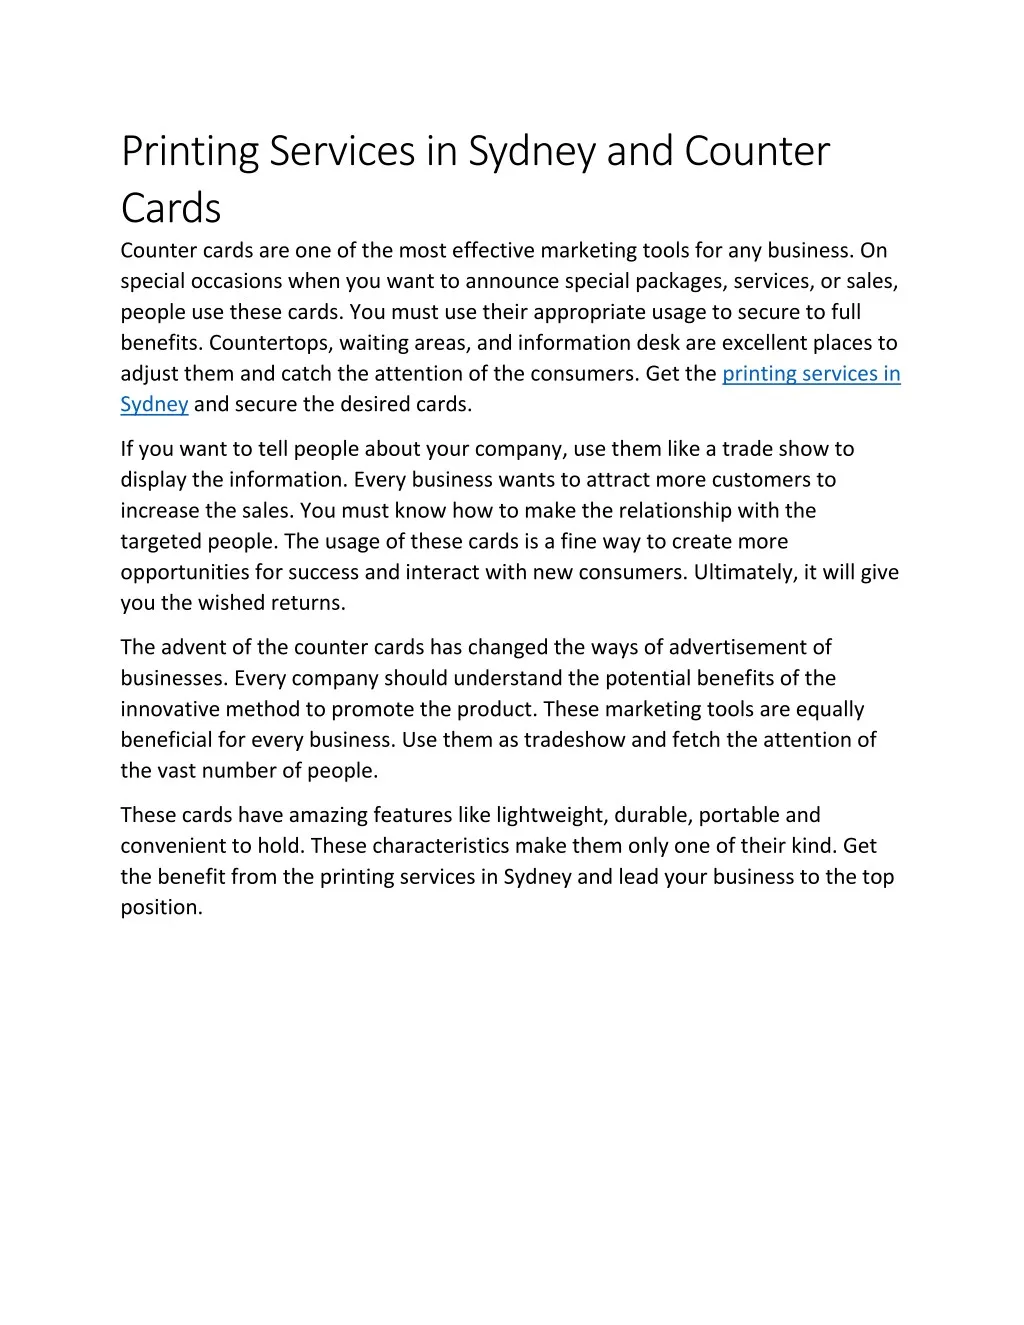 printing services in sydney and counter cards